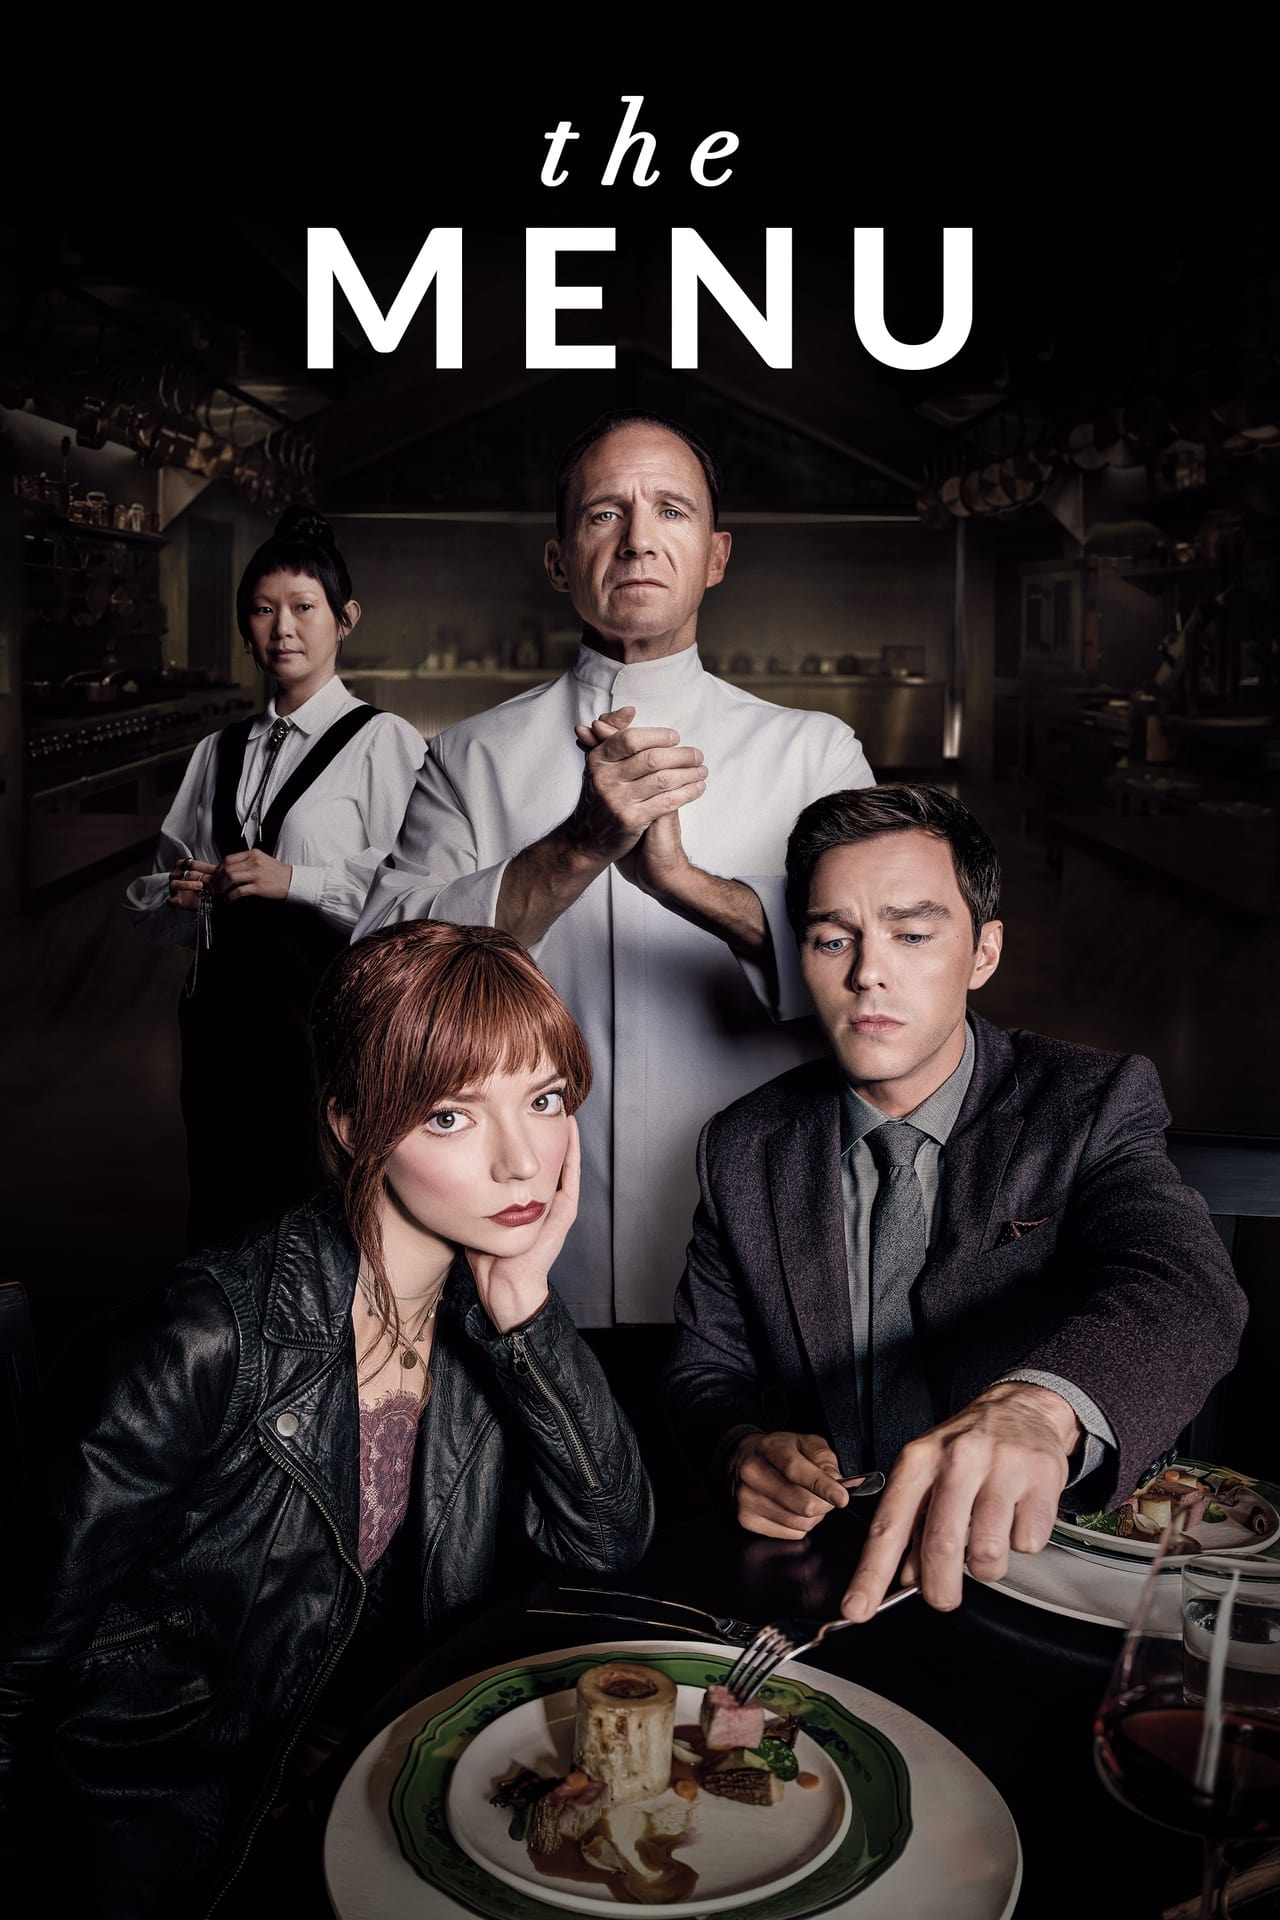 The Menu Movie Is About the Art of Eating the Rich